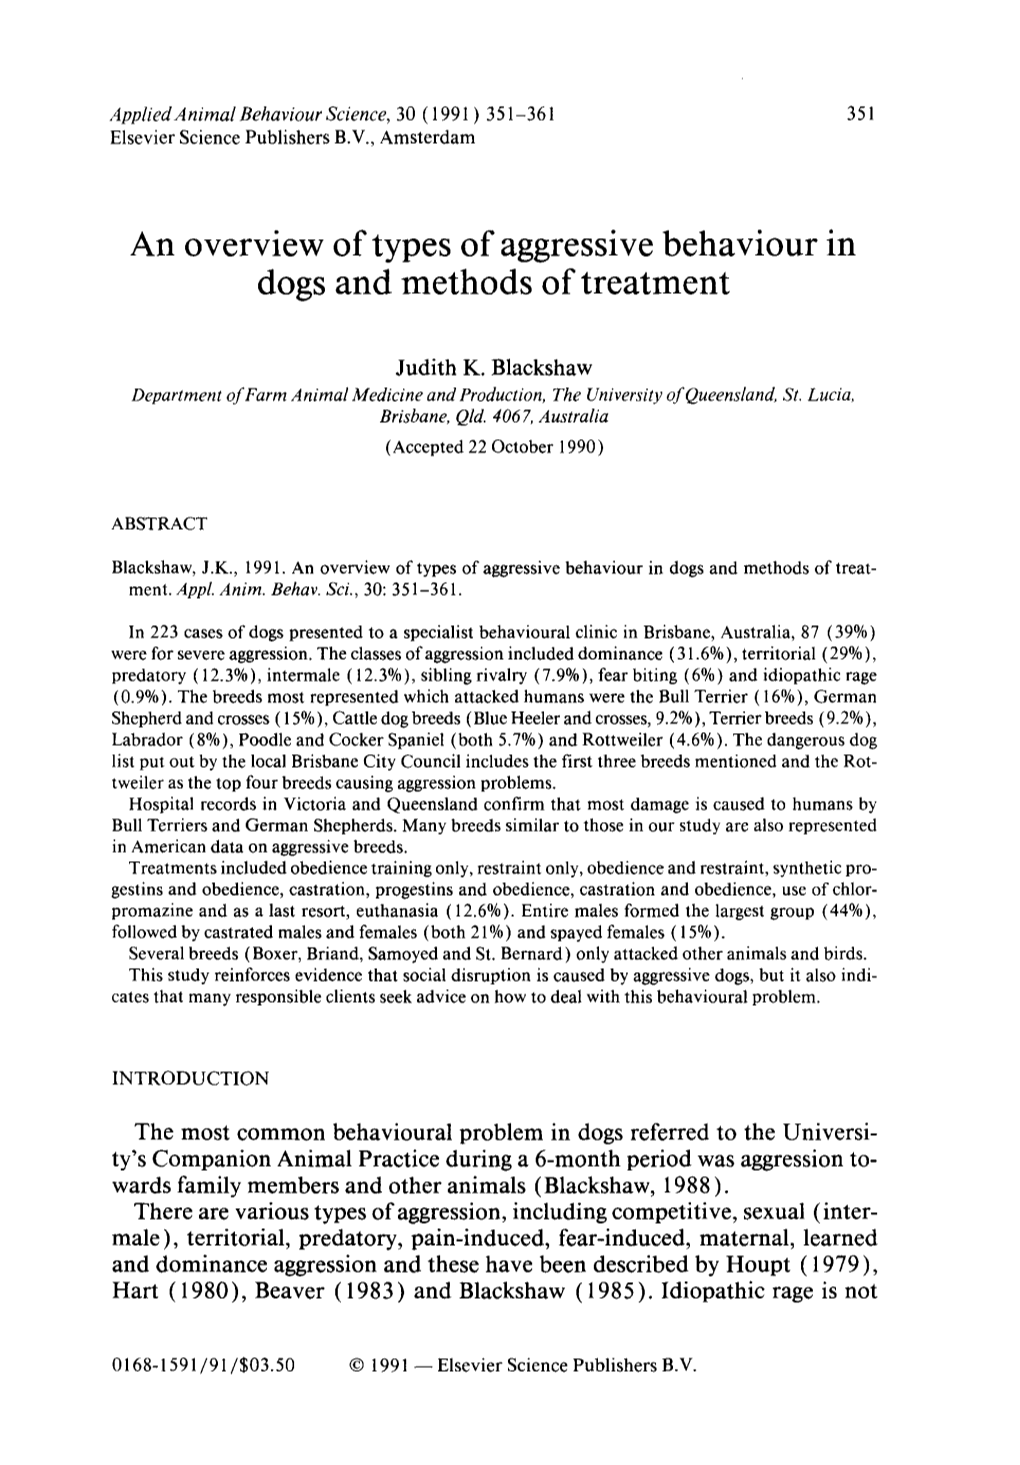 An Overview of Types of Aggressive Behaviour in Dogs and Methods of Treatment